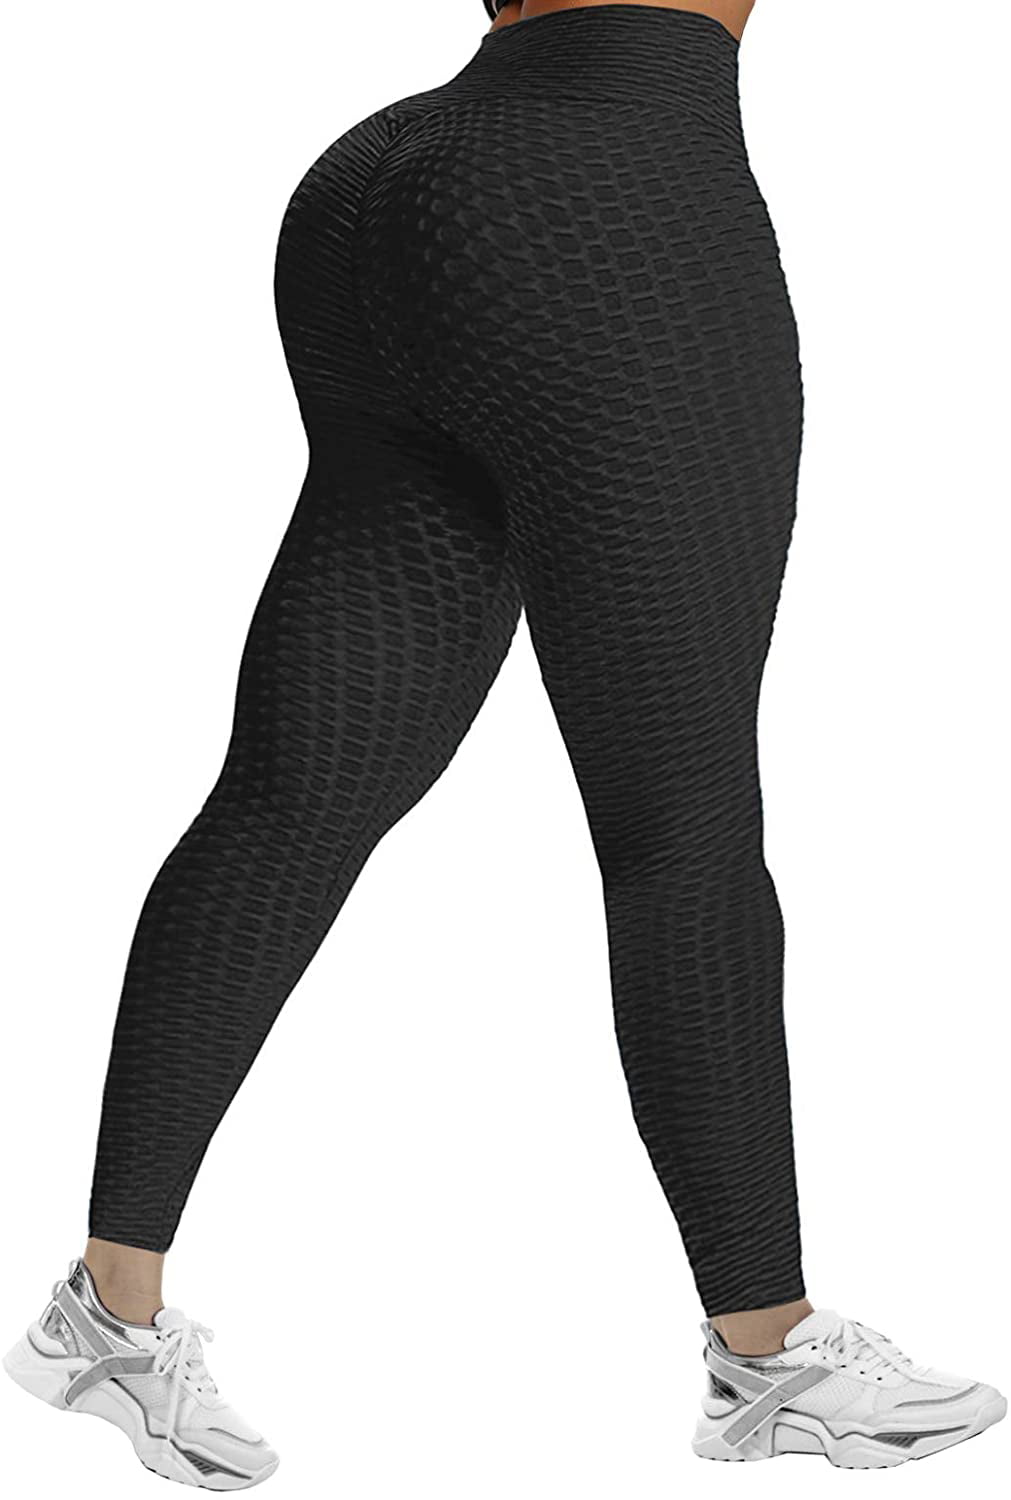 Leggings For Women Butt Lifting Anti Cellulite High Waisted Yoga Pants Workout Tummy Control Sport Tights 